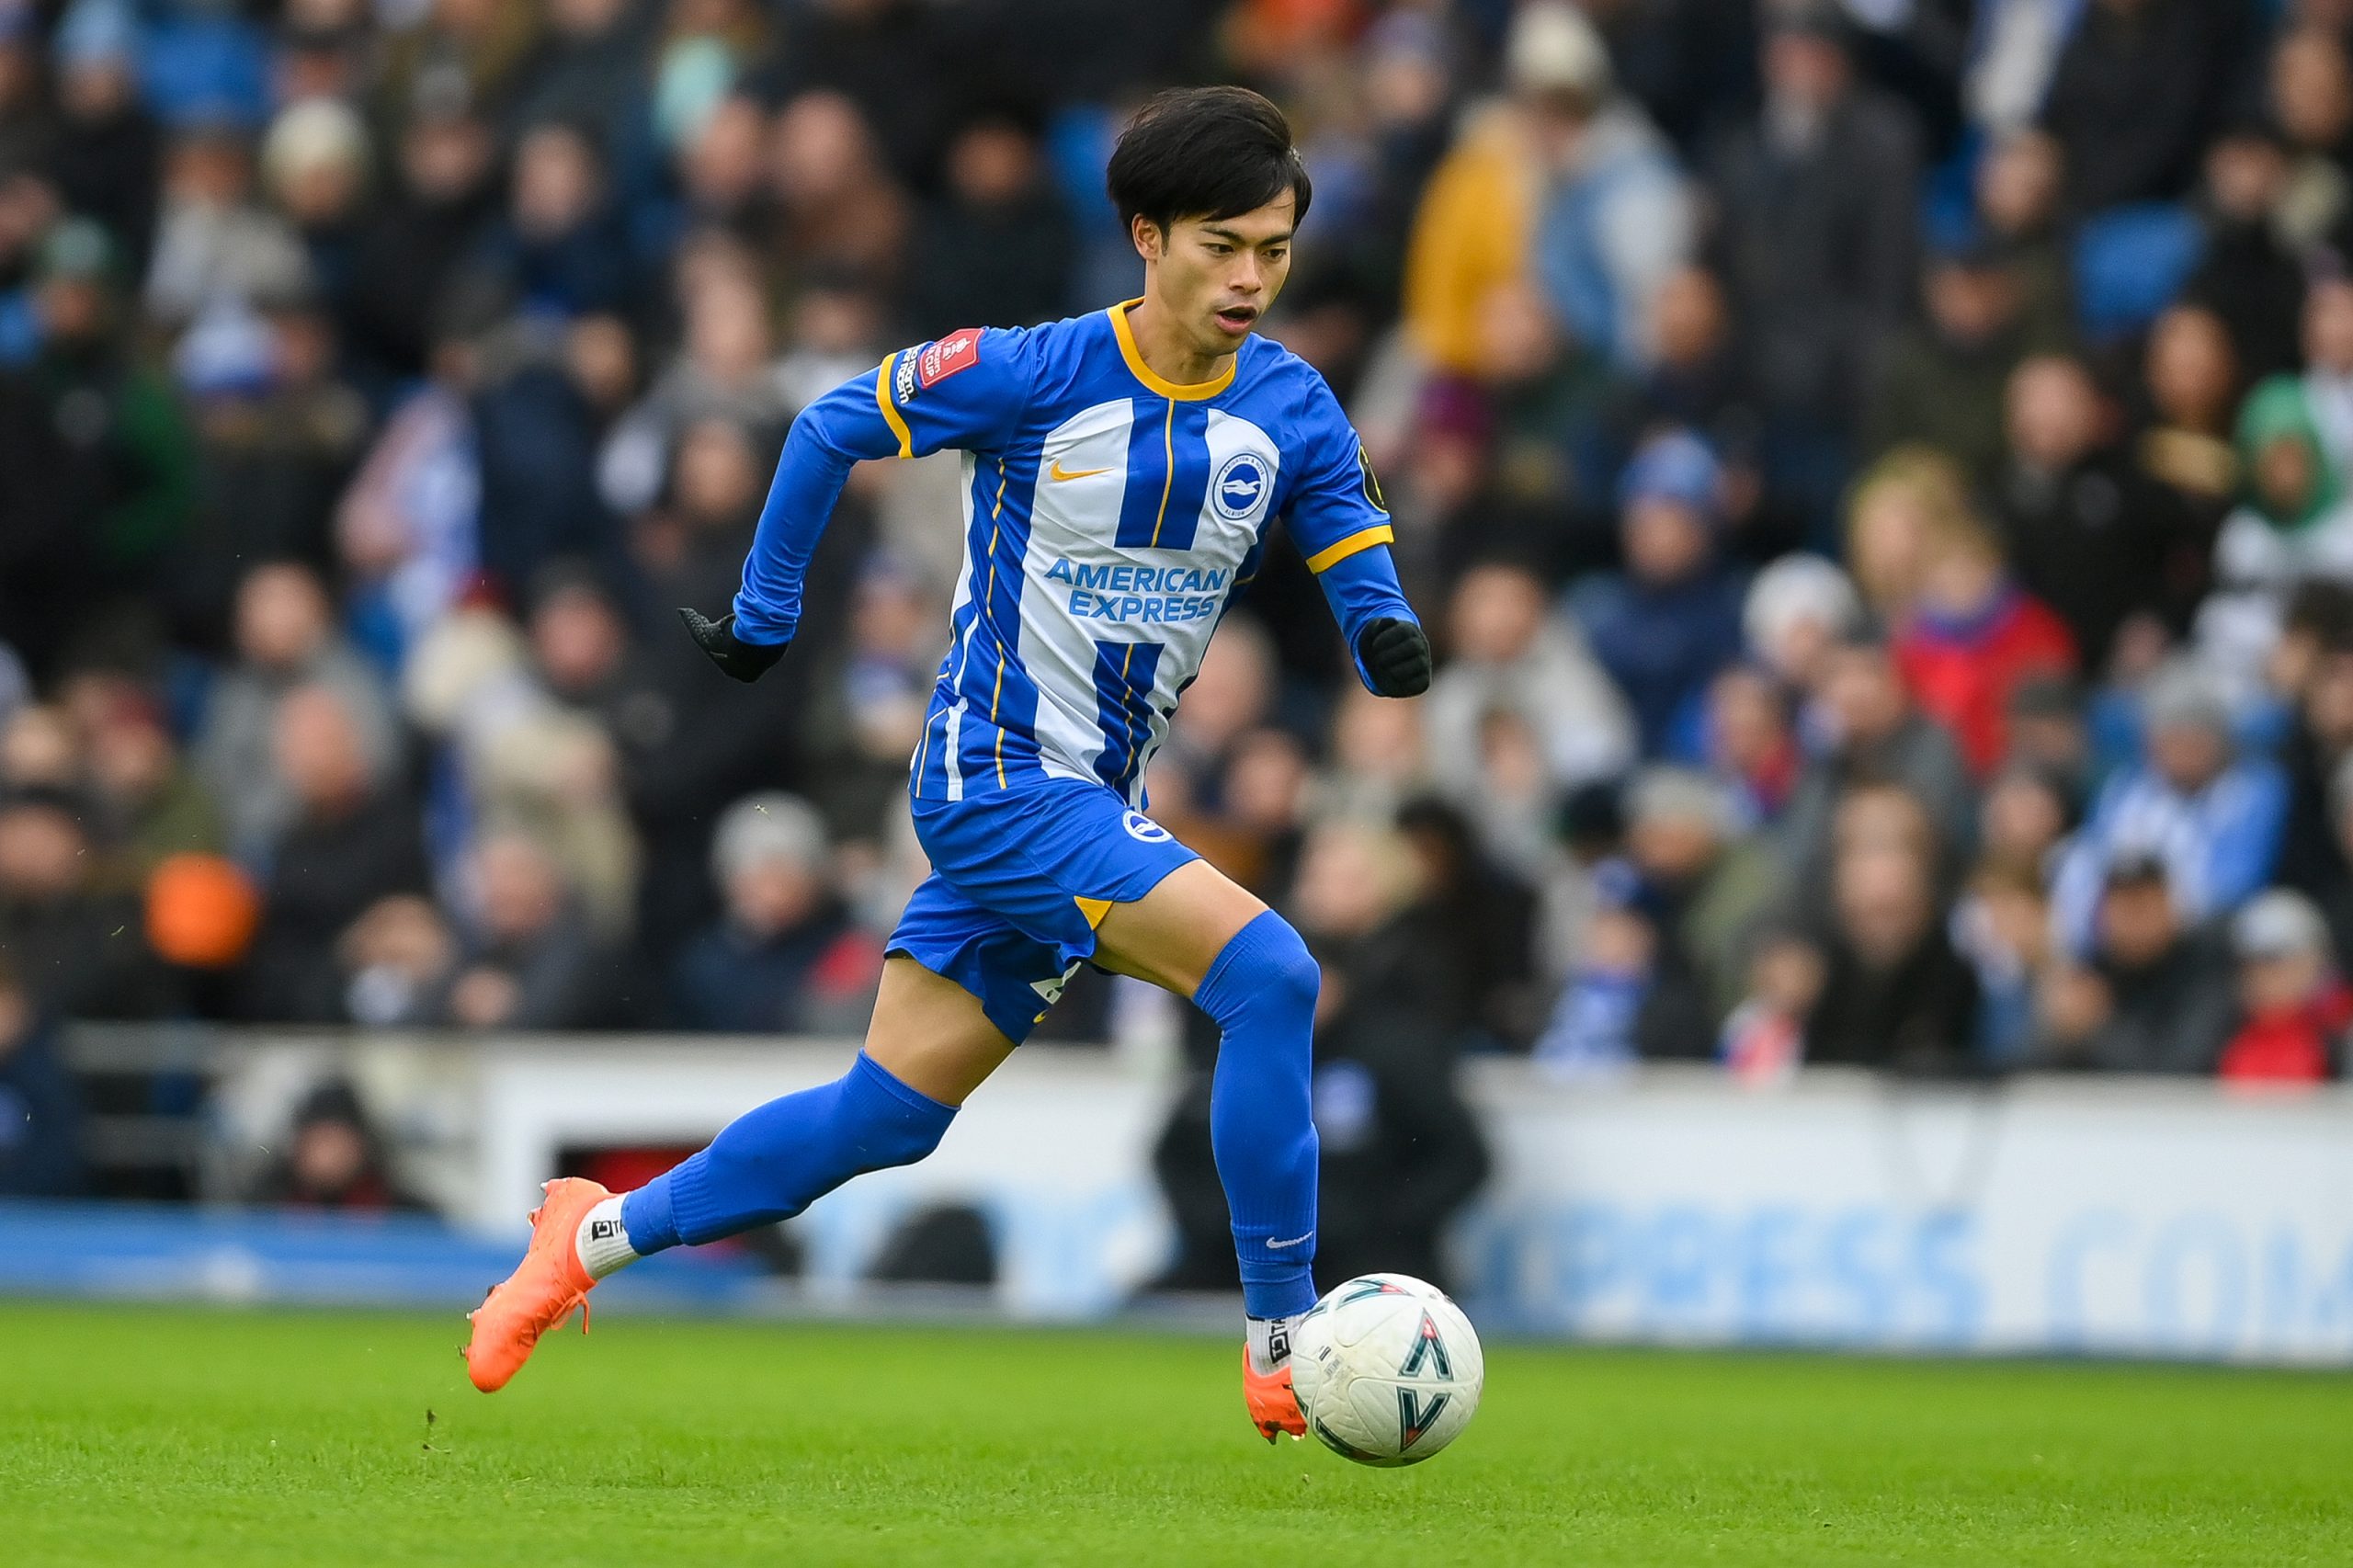 Kaoru Mitoma of Brighton & Hove Albion in action during the Emirates FA Cup Fourth Round match between Brighton & Hove Albion and Liverpool at Amex Stadium on January 29, 2023 in Brighton, England.